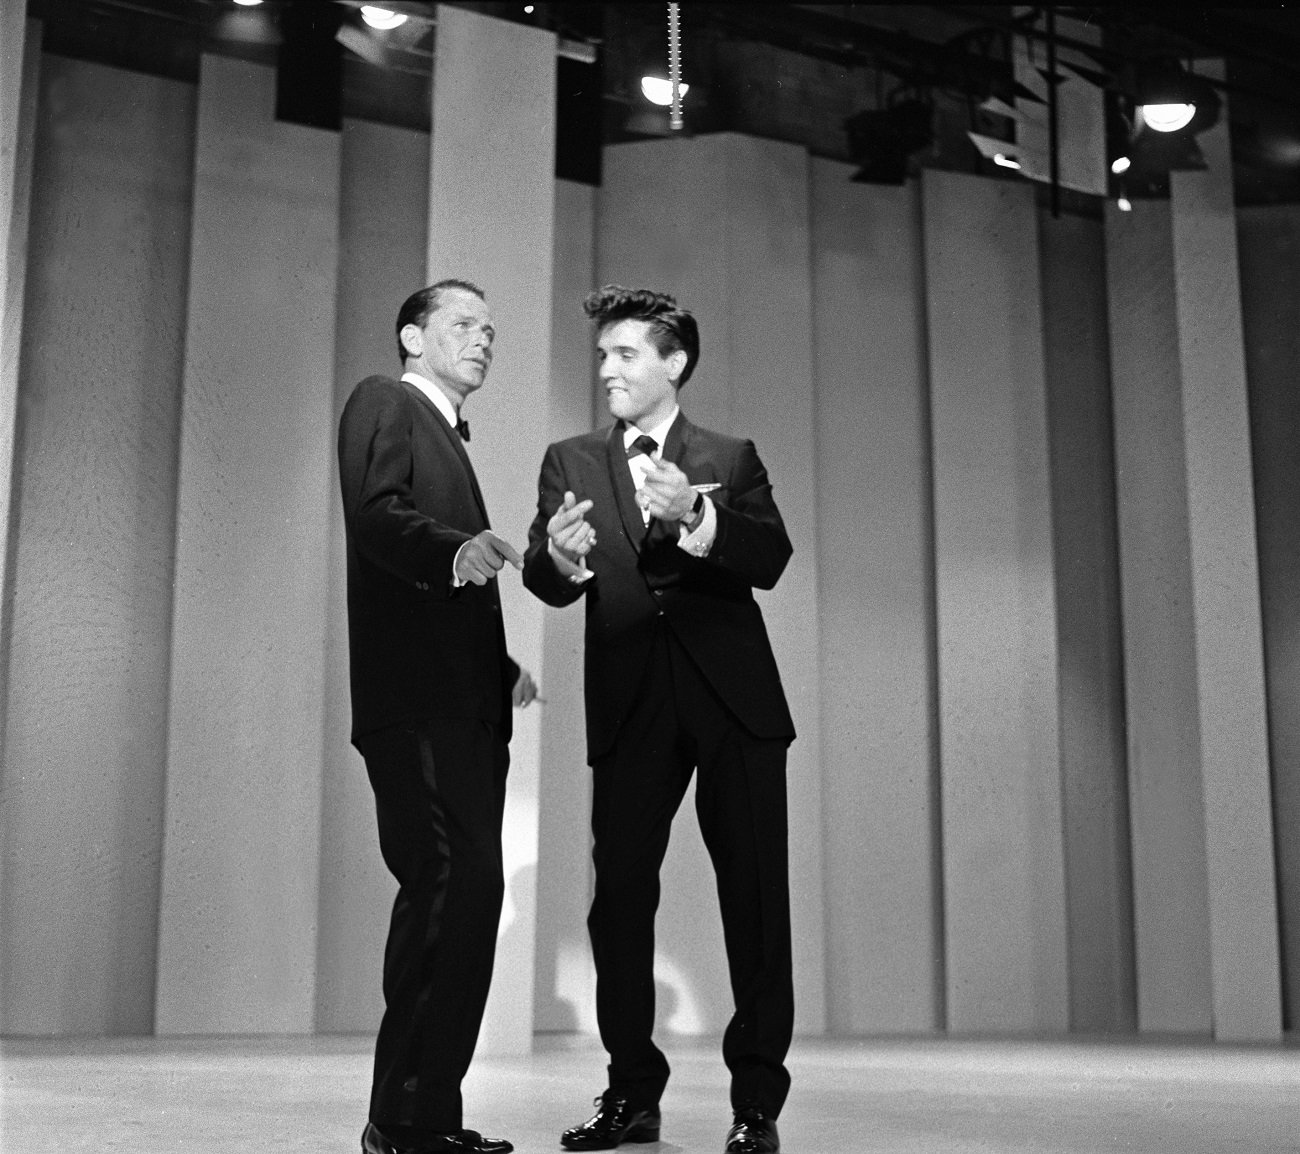 A black and white photo of Frank Sinatra and Elvis wearing tuxedos during a television special.